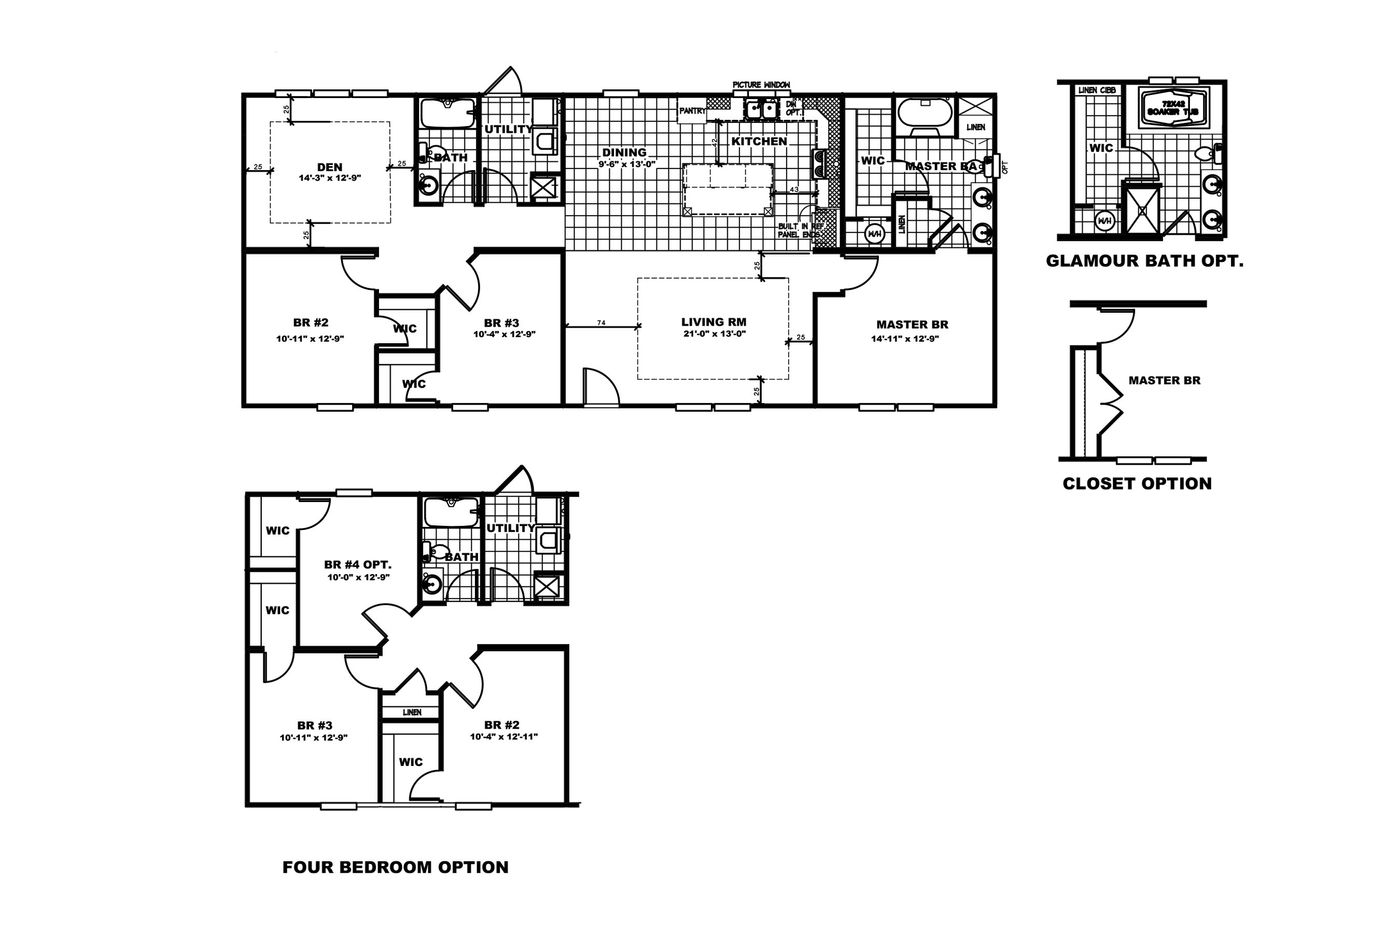 The 5520 SWEET ONE Floor Plan. This Manufactured Mobile Home features 3 bedrooms and 2 baths.